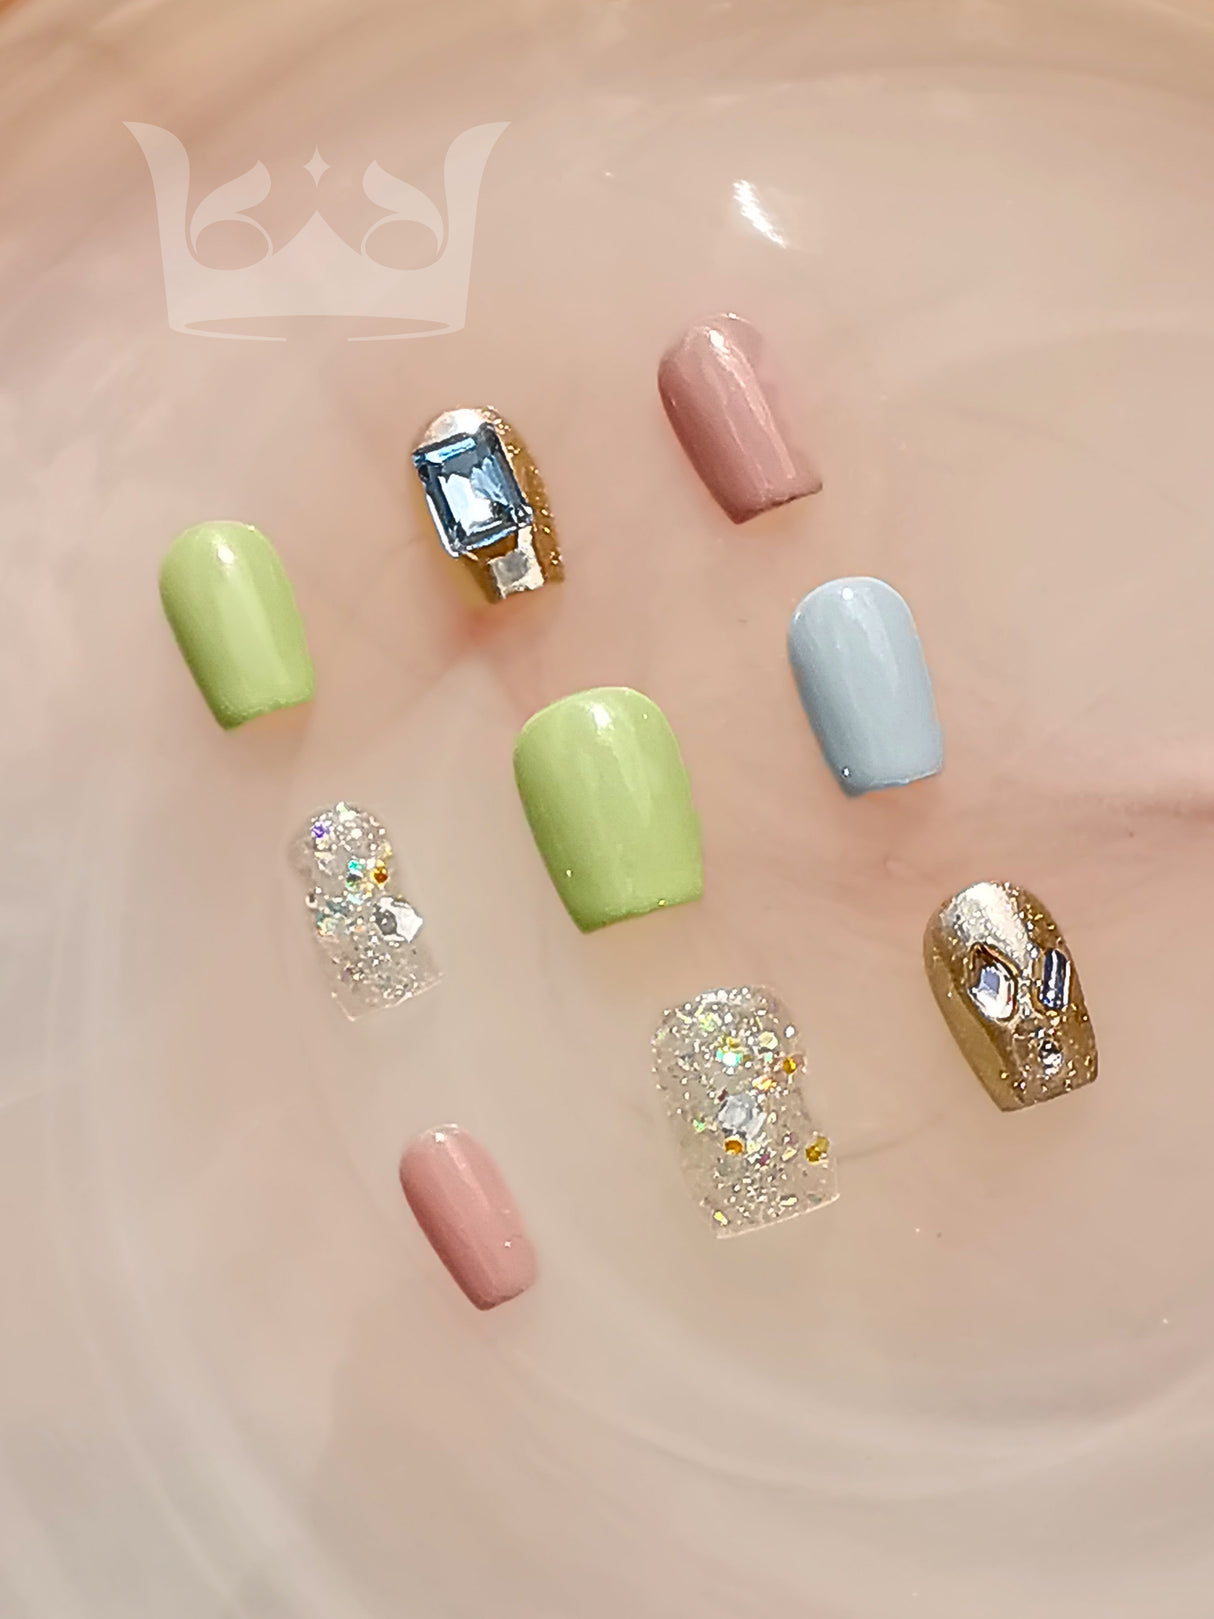 Luxury nails for cute purposes in nail fashion and design. Variety of colors, textures, glitter, diamonds, metallic sheen, and arrangement. Endless possibilities.